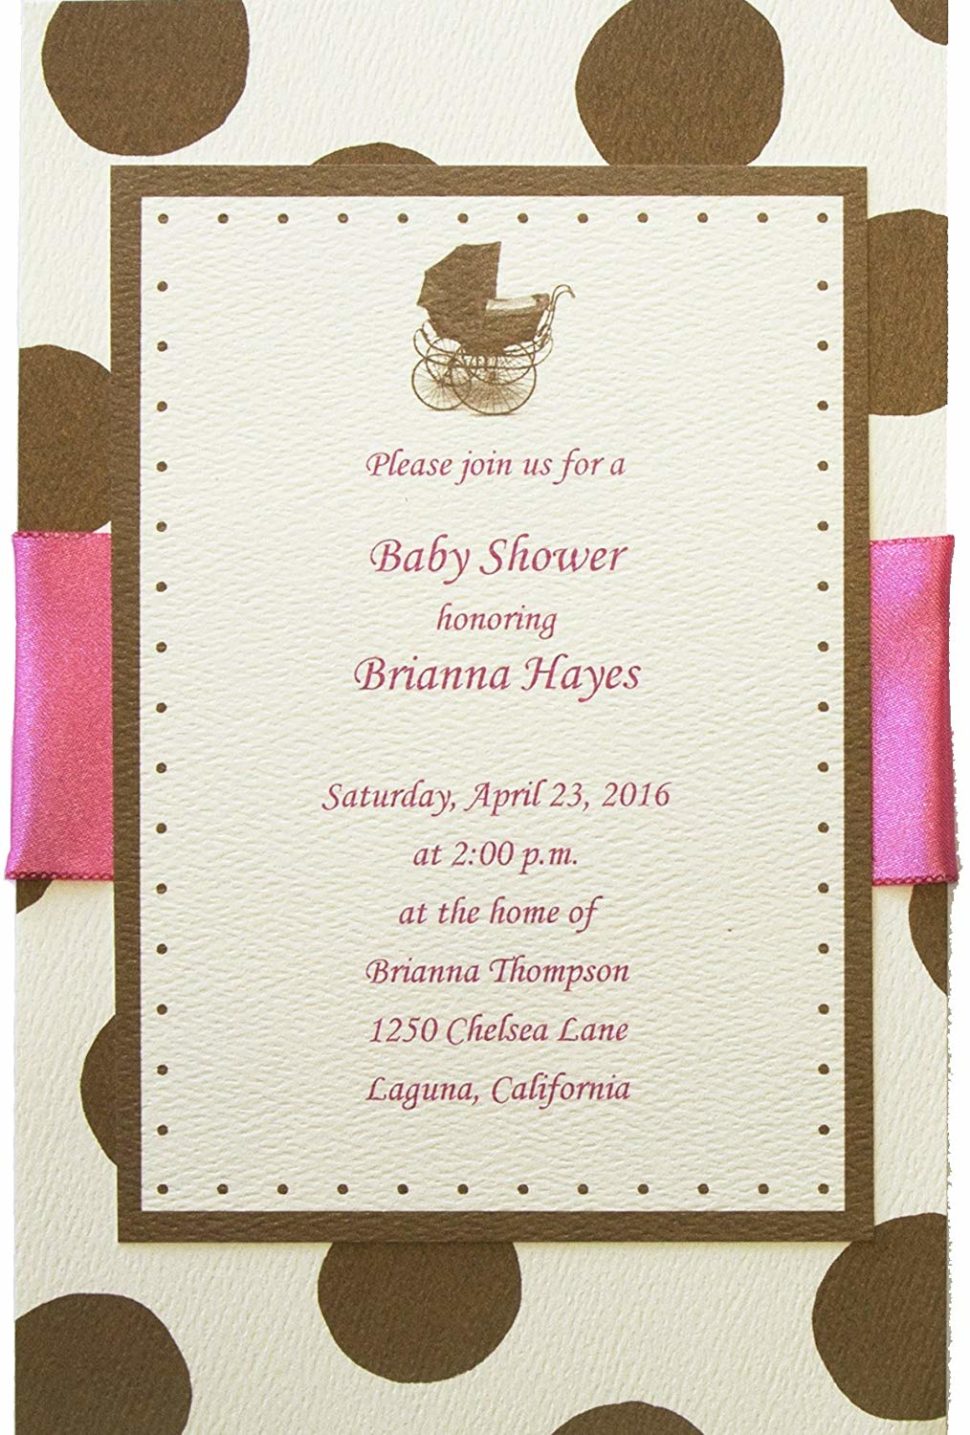 Medium Size of Baby Shower:baby Shower Invitations Nursery For Girls Baby Shower Ideas For Girls Baby Girl Themes For Baby Shower Pinterest Nursery Ideas